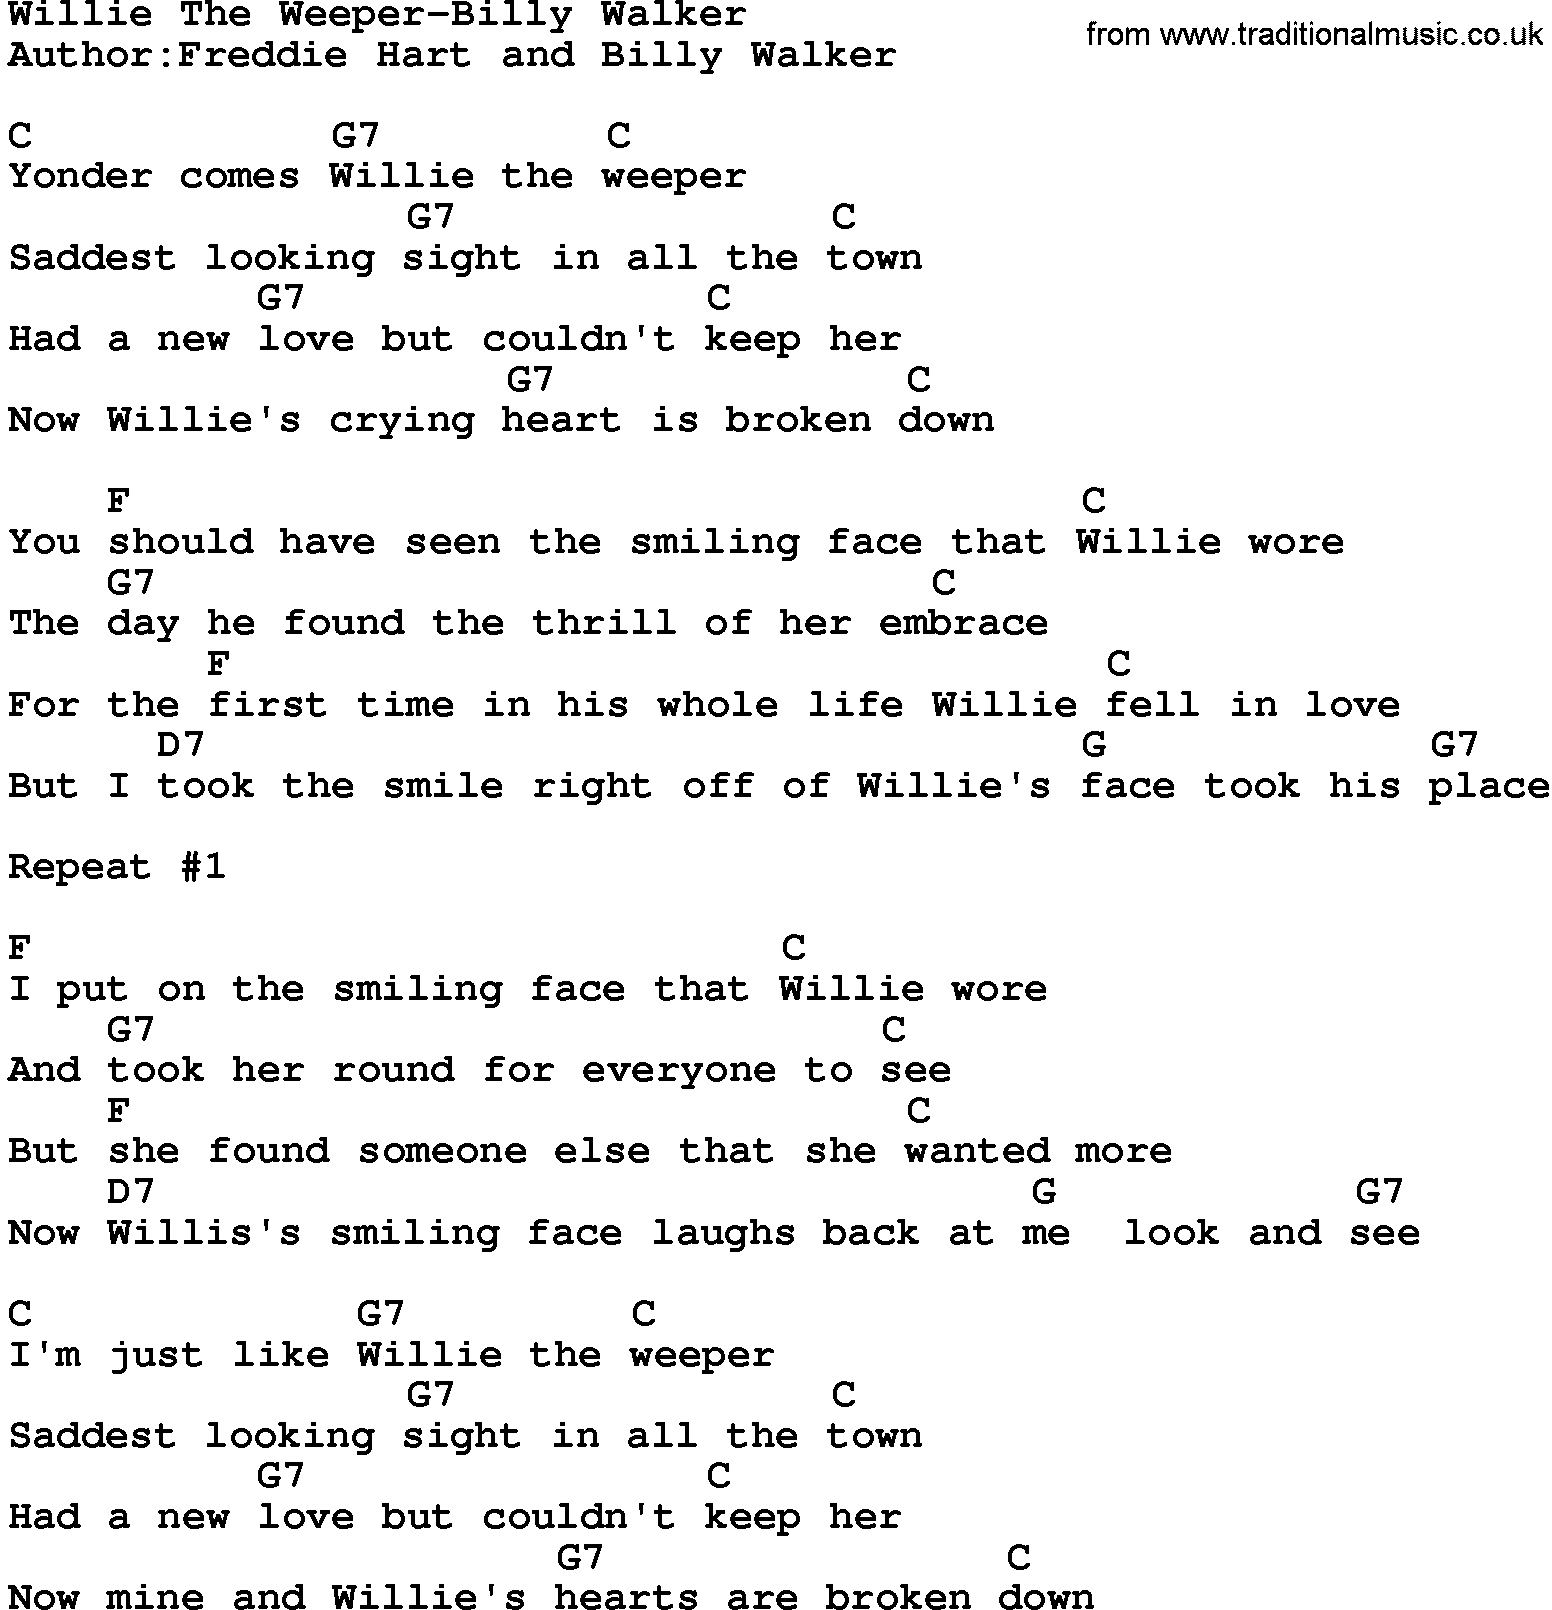 Country music song: Willie The Weeper-Billy Walker lyrics and chords